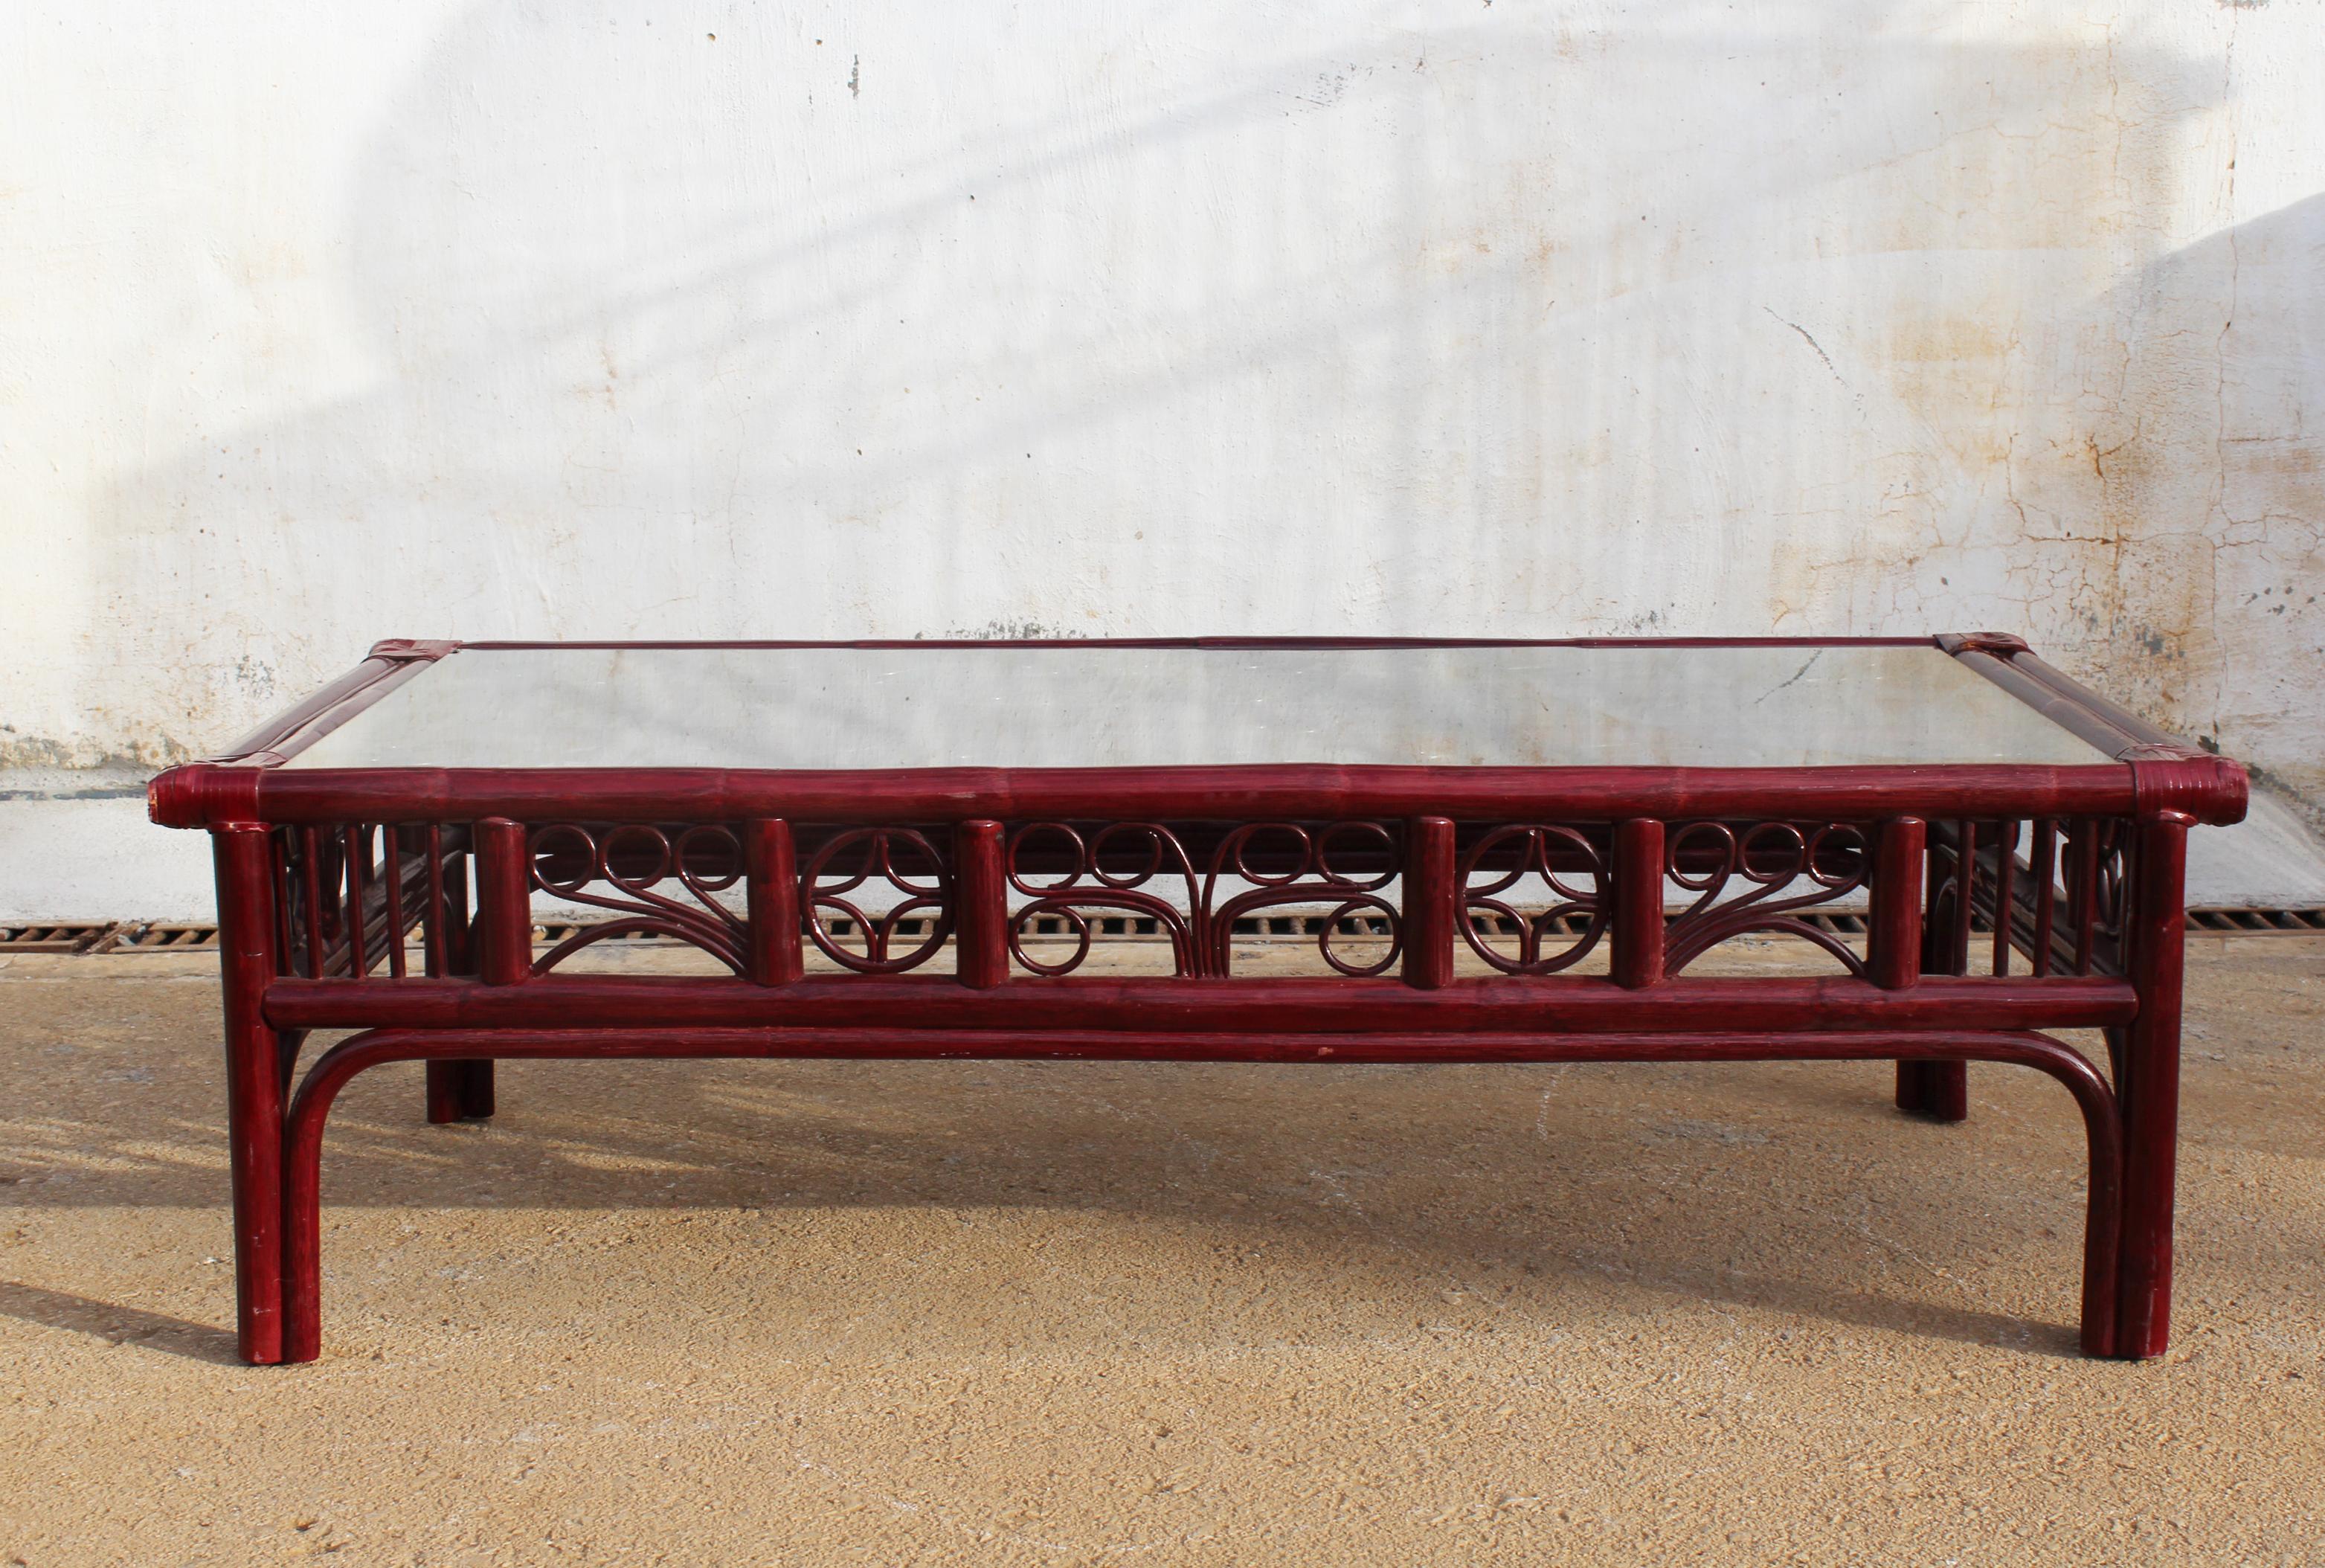 1970s Spanish Oriental Style Red Wooden Coffee Table with Leather Binds For Sale 1